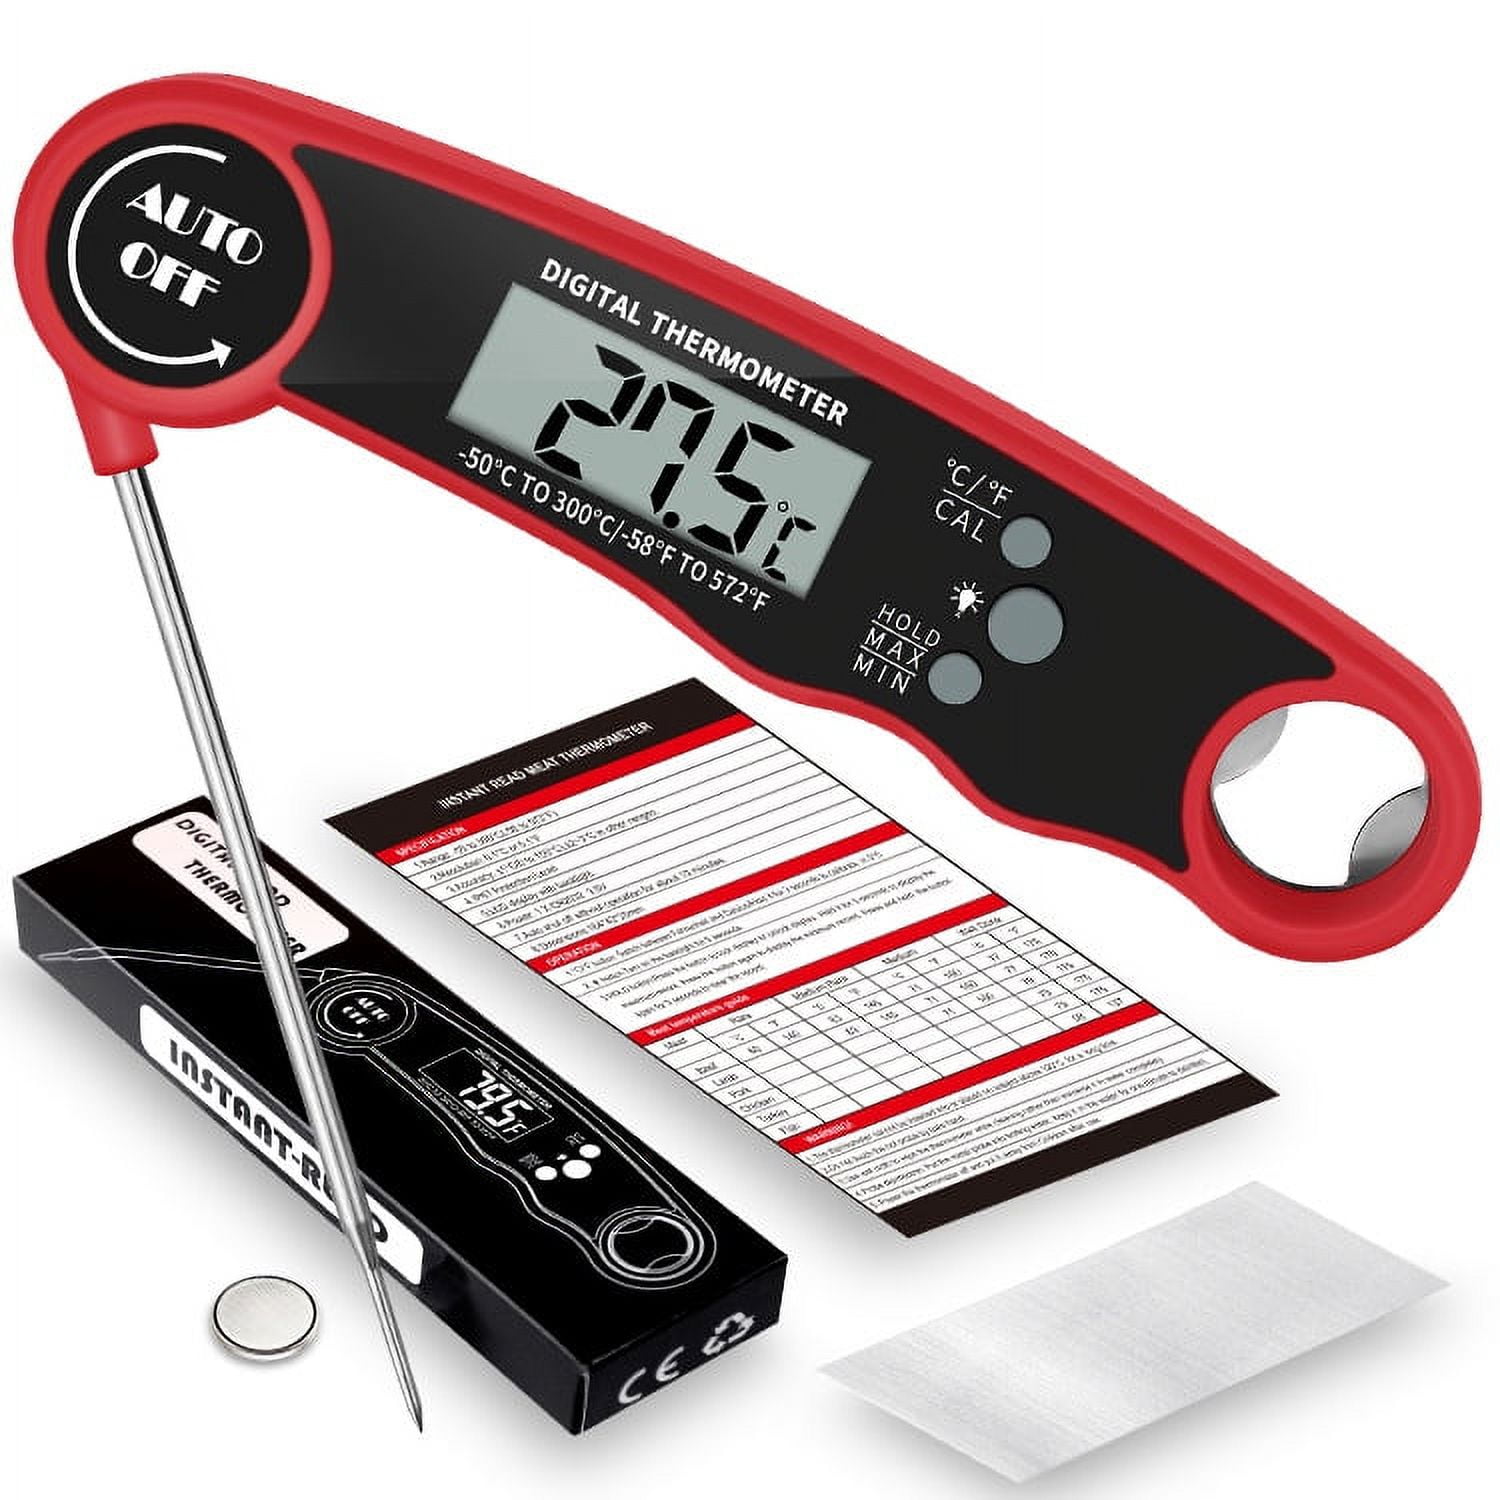 Tel-Tru BQ300R Barbecue Cooker and Smoker Thermometer, 3 inch Anti-Parallax Aluminum Dial with Calibration Reset, 2.5 Stem, 50/550 Degrees F